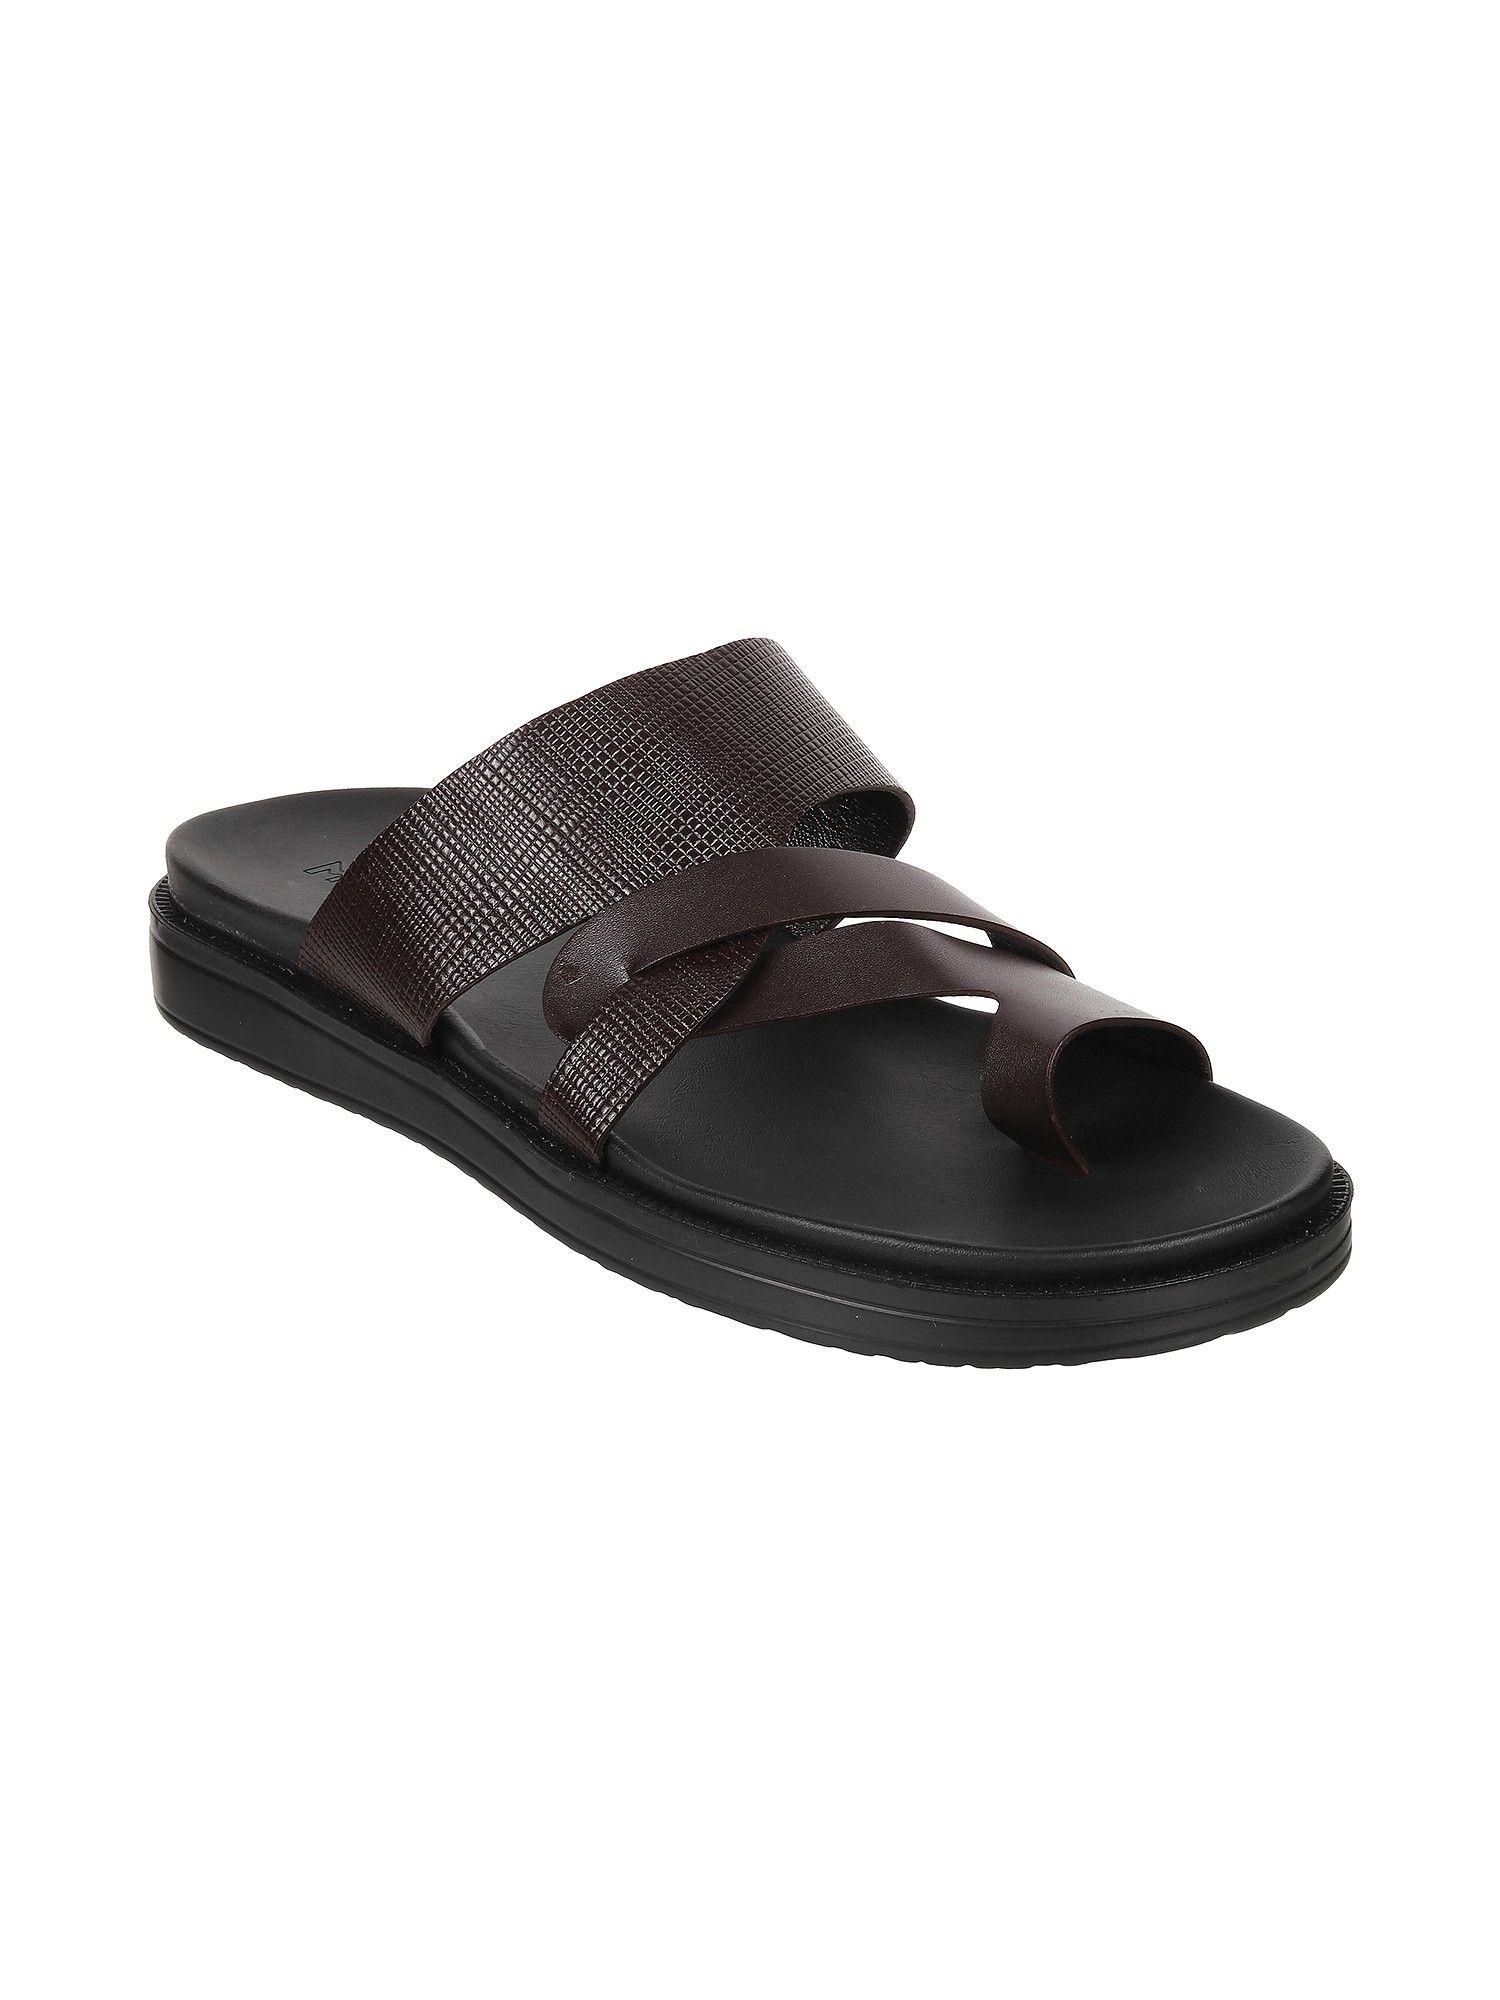 mens brown flat chappalsmochi mens brown synthetic textured sandals